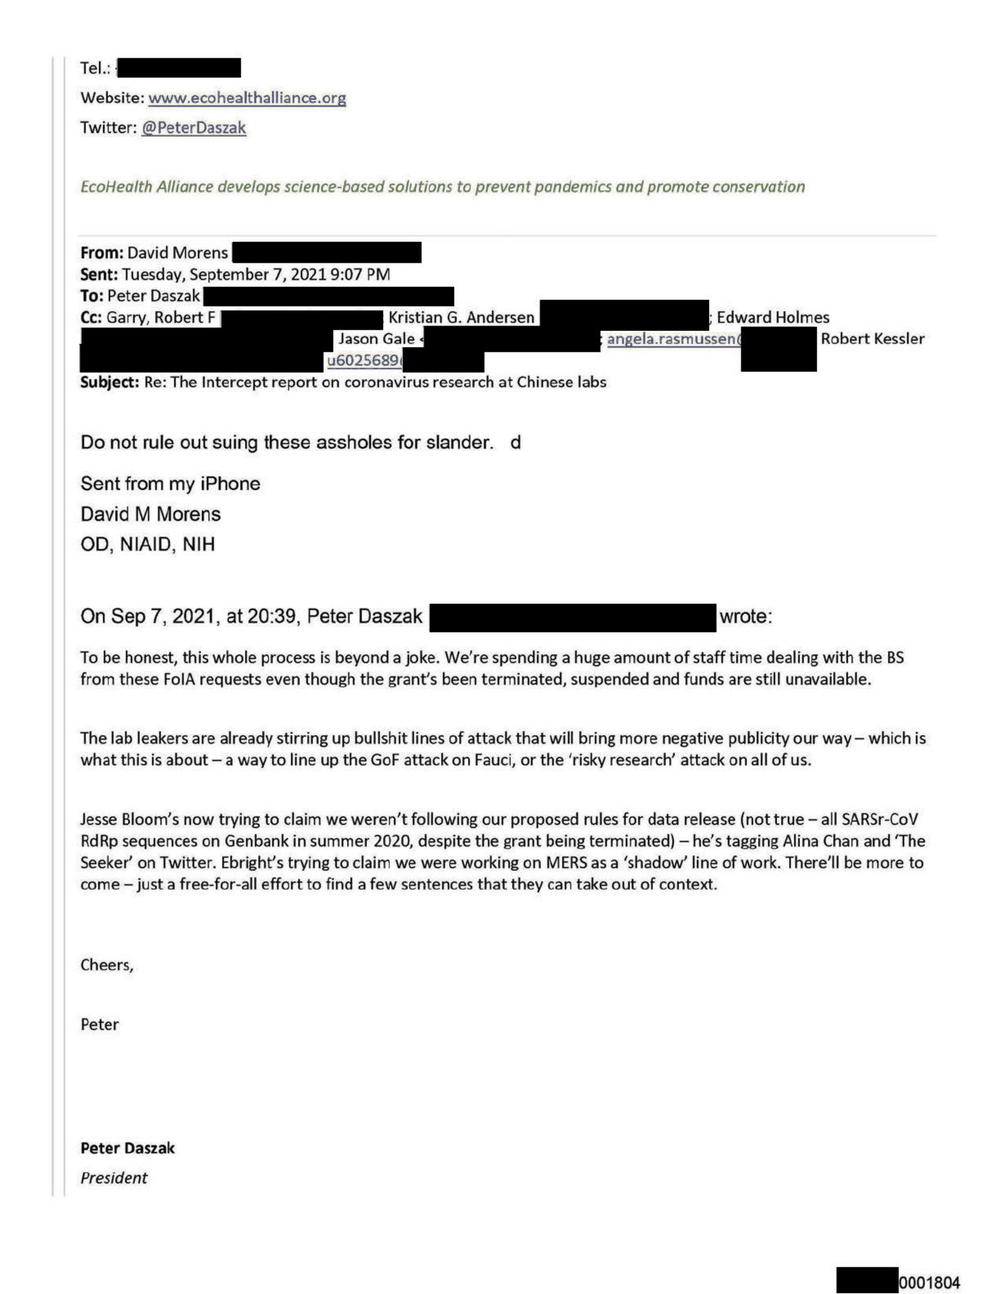 Page 31 from David Morens NIH Emails Redacted